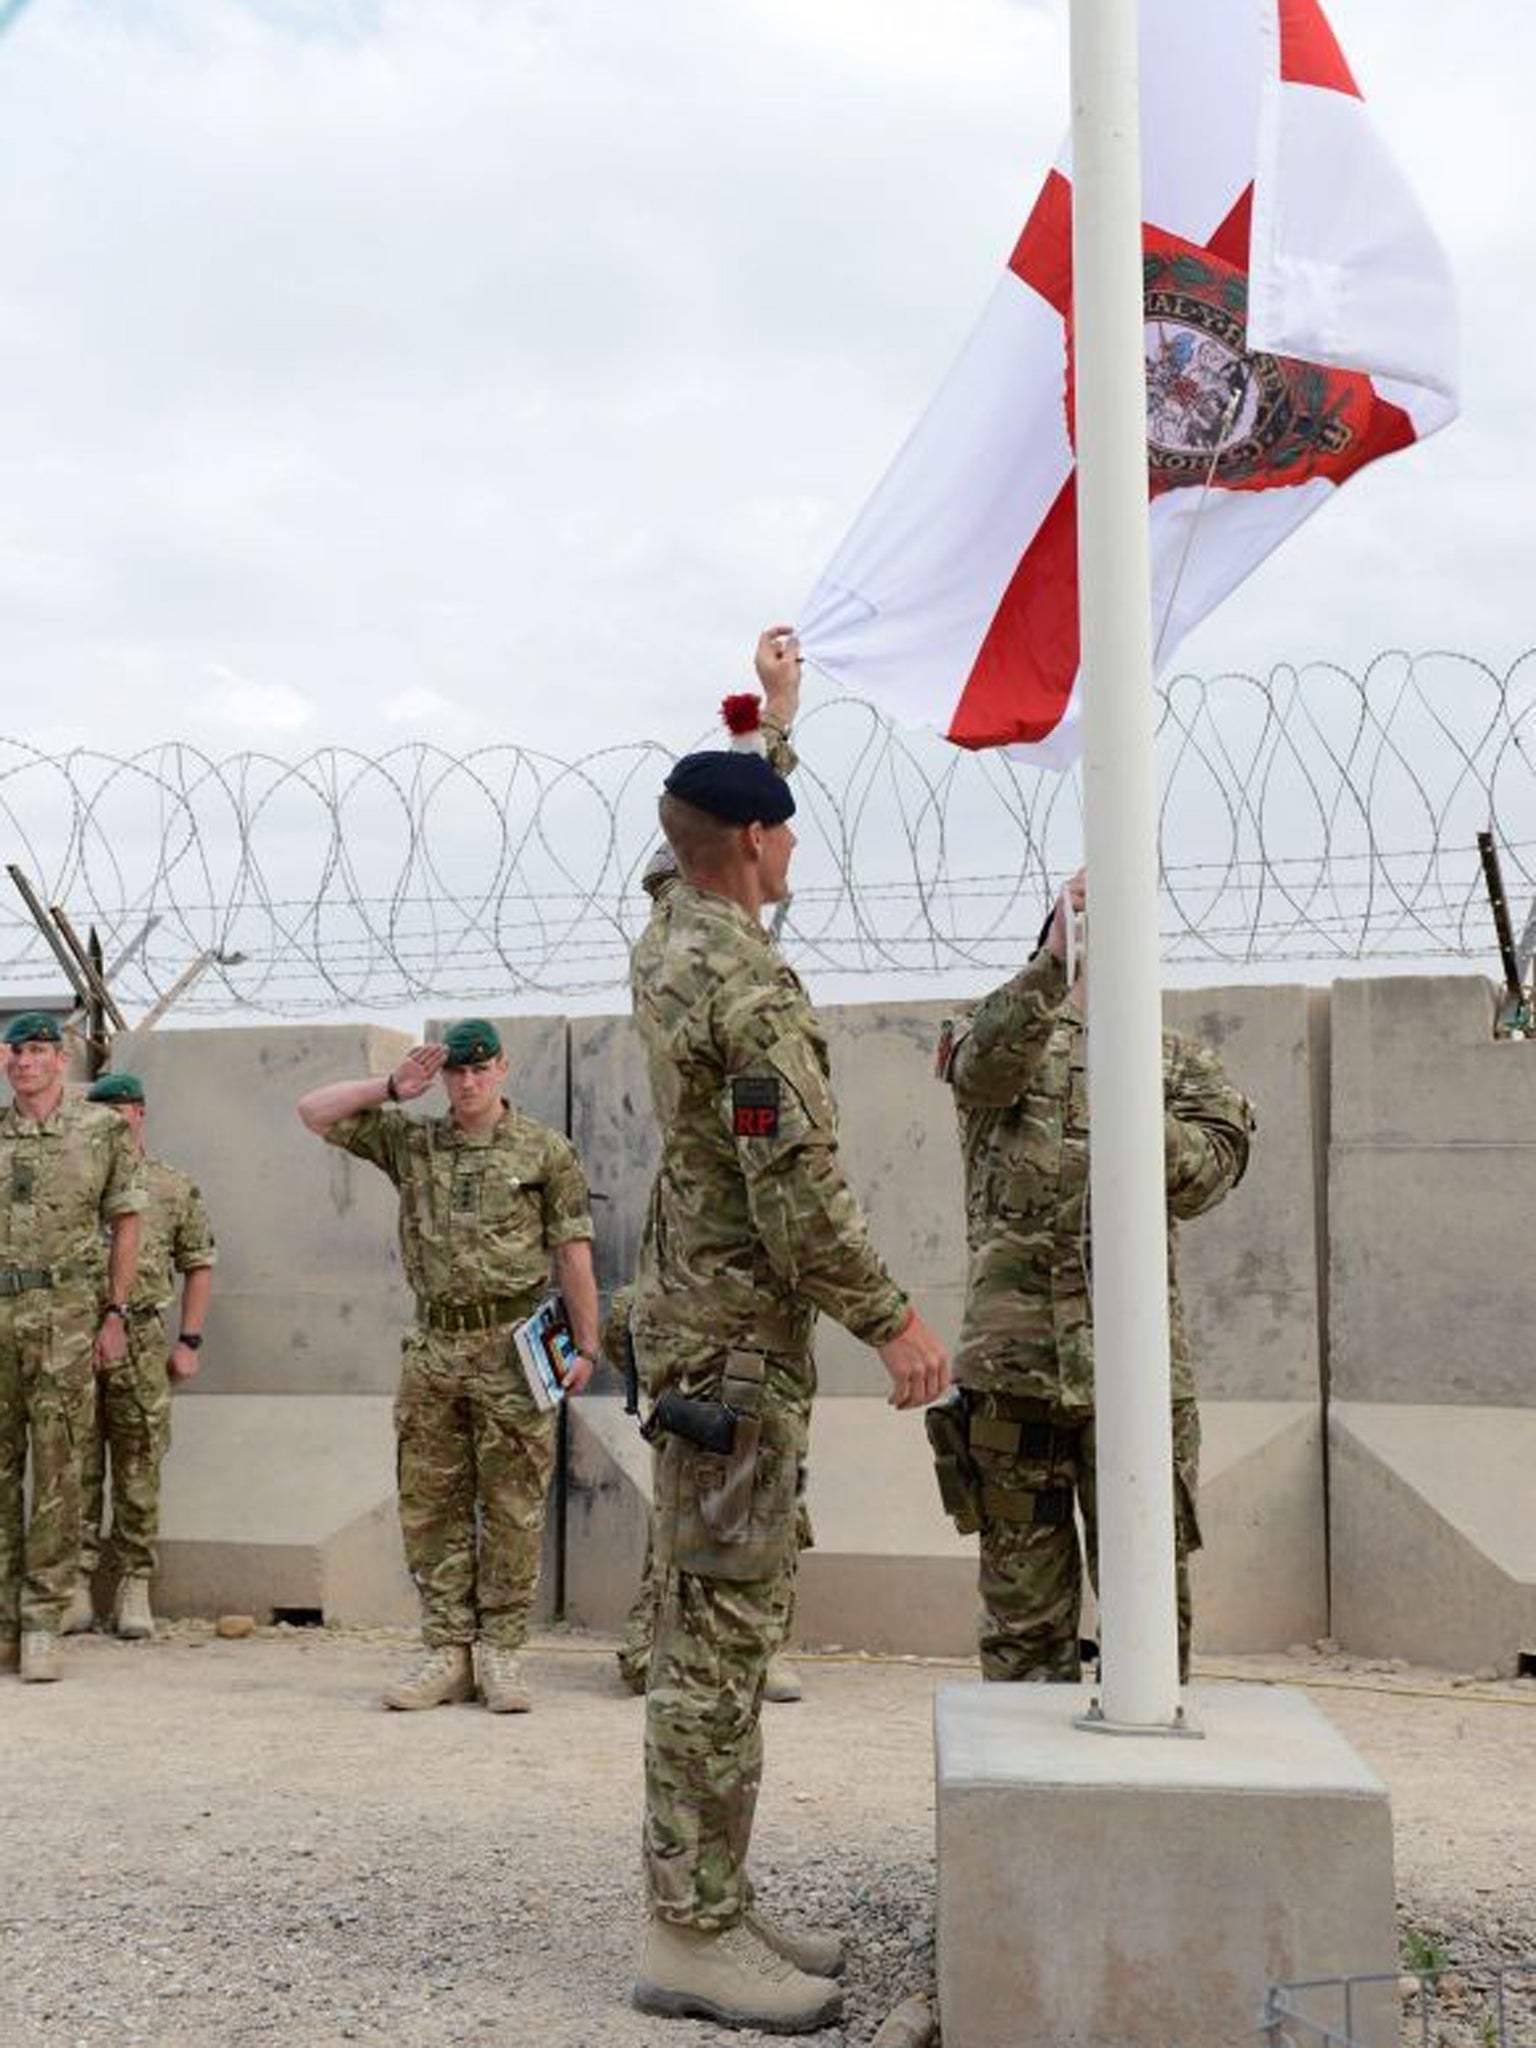 Troops from 40 Commando Royal Marines symbolically lowering the Royal Navy's white ensign that has flown above their main operating base in the Nahr-e Saraj district for over a decade